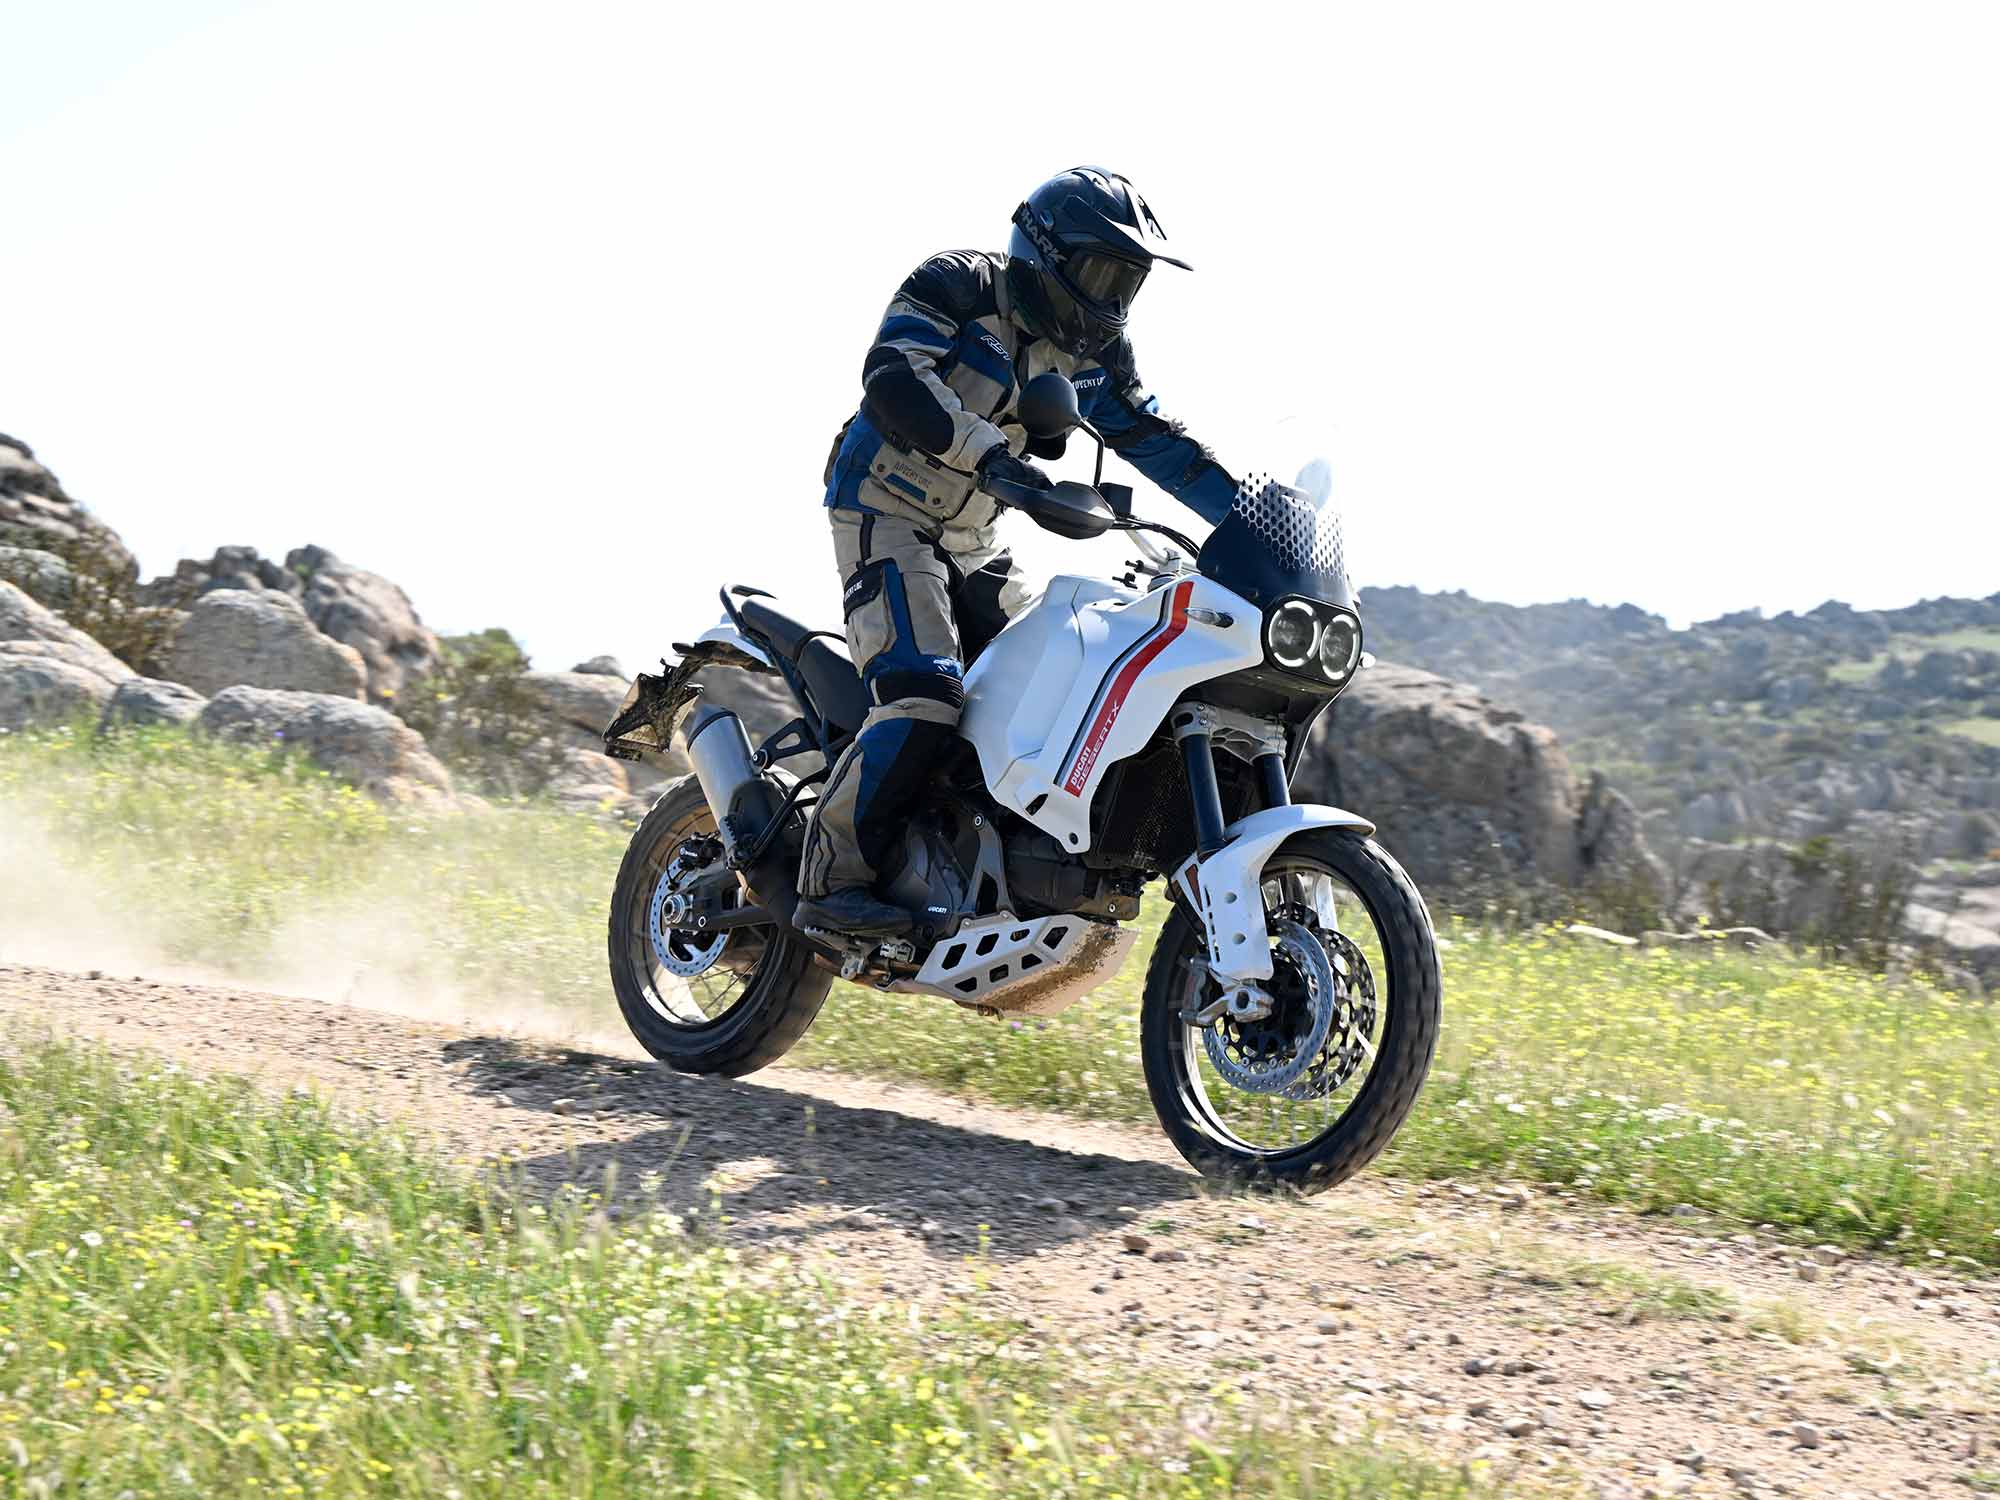 2022 Ducati Desert X Review: The Good and the Bad